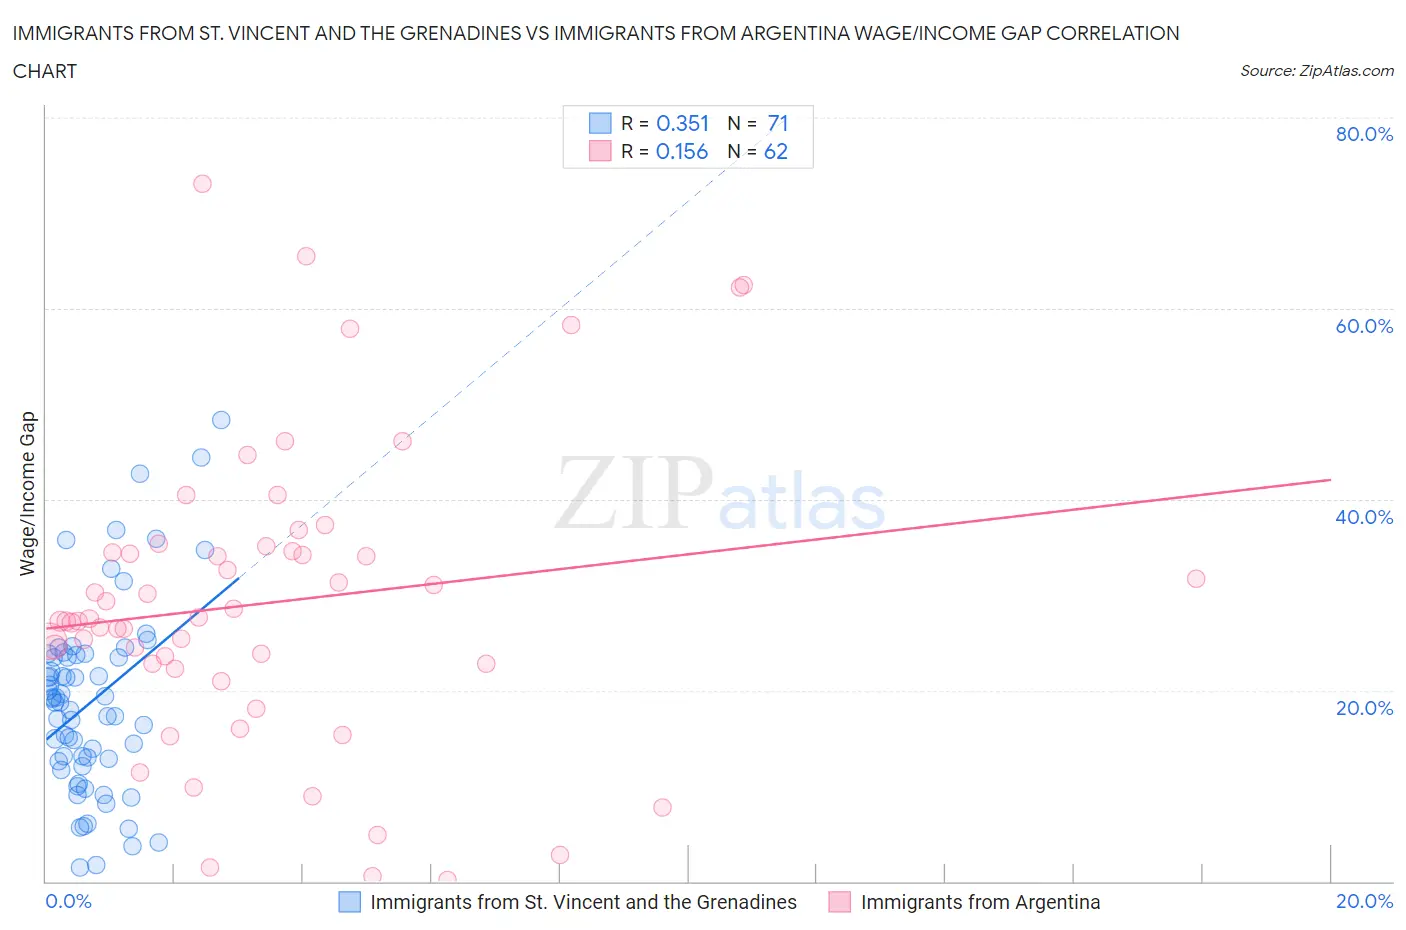 Immigrants from St. Vincent and the Grenadines vs Immigrants from Argentina Wage/Income Gap